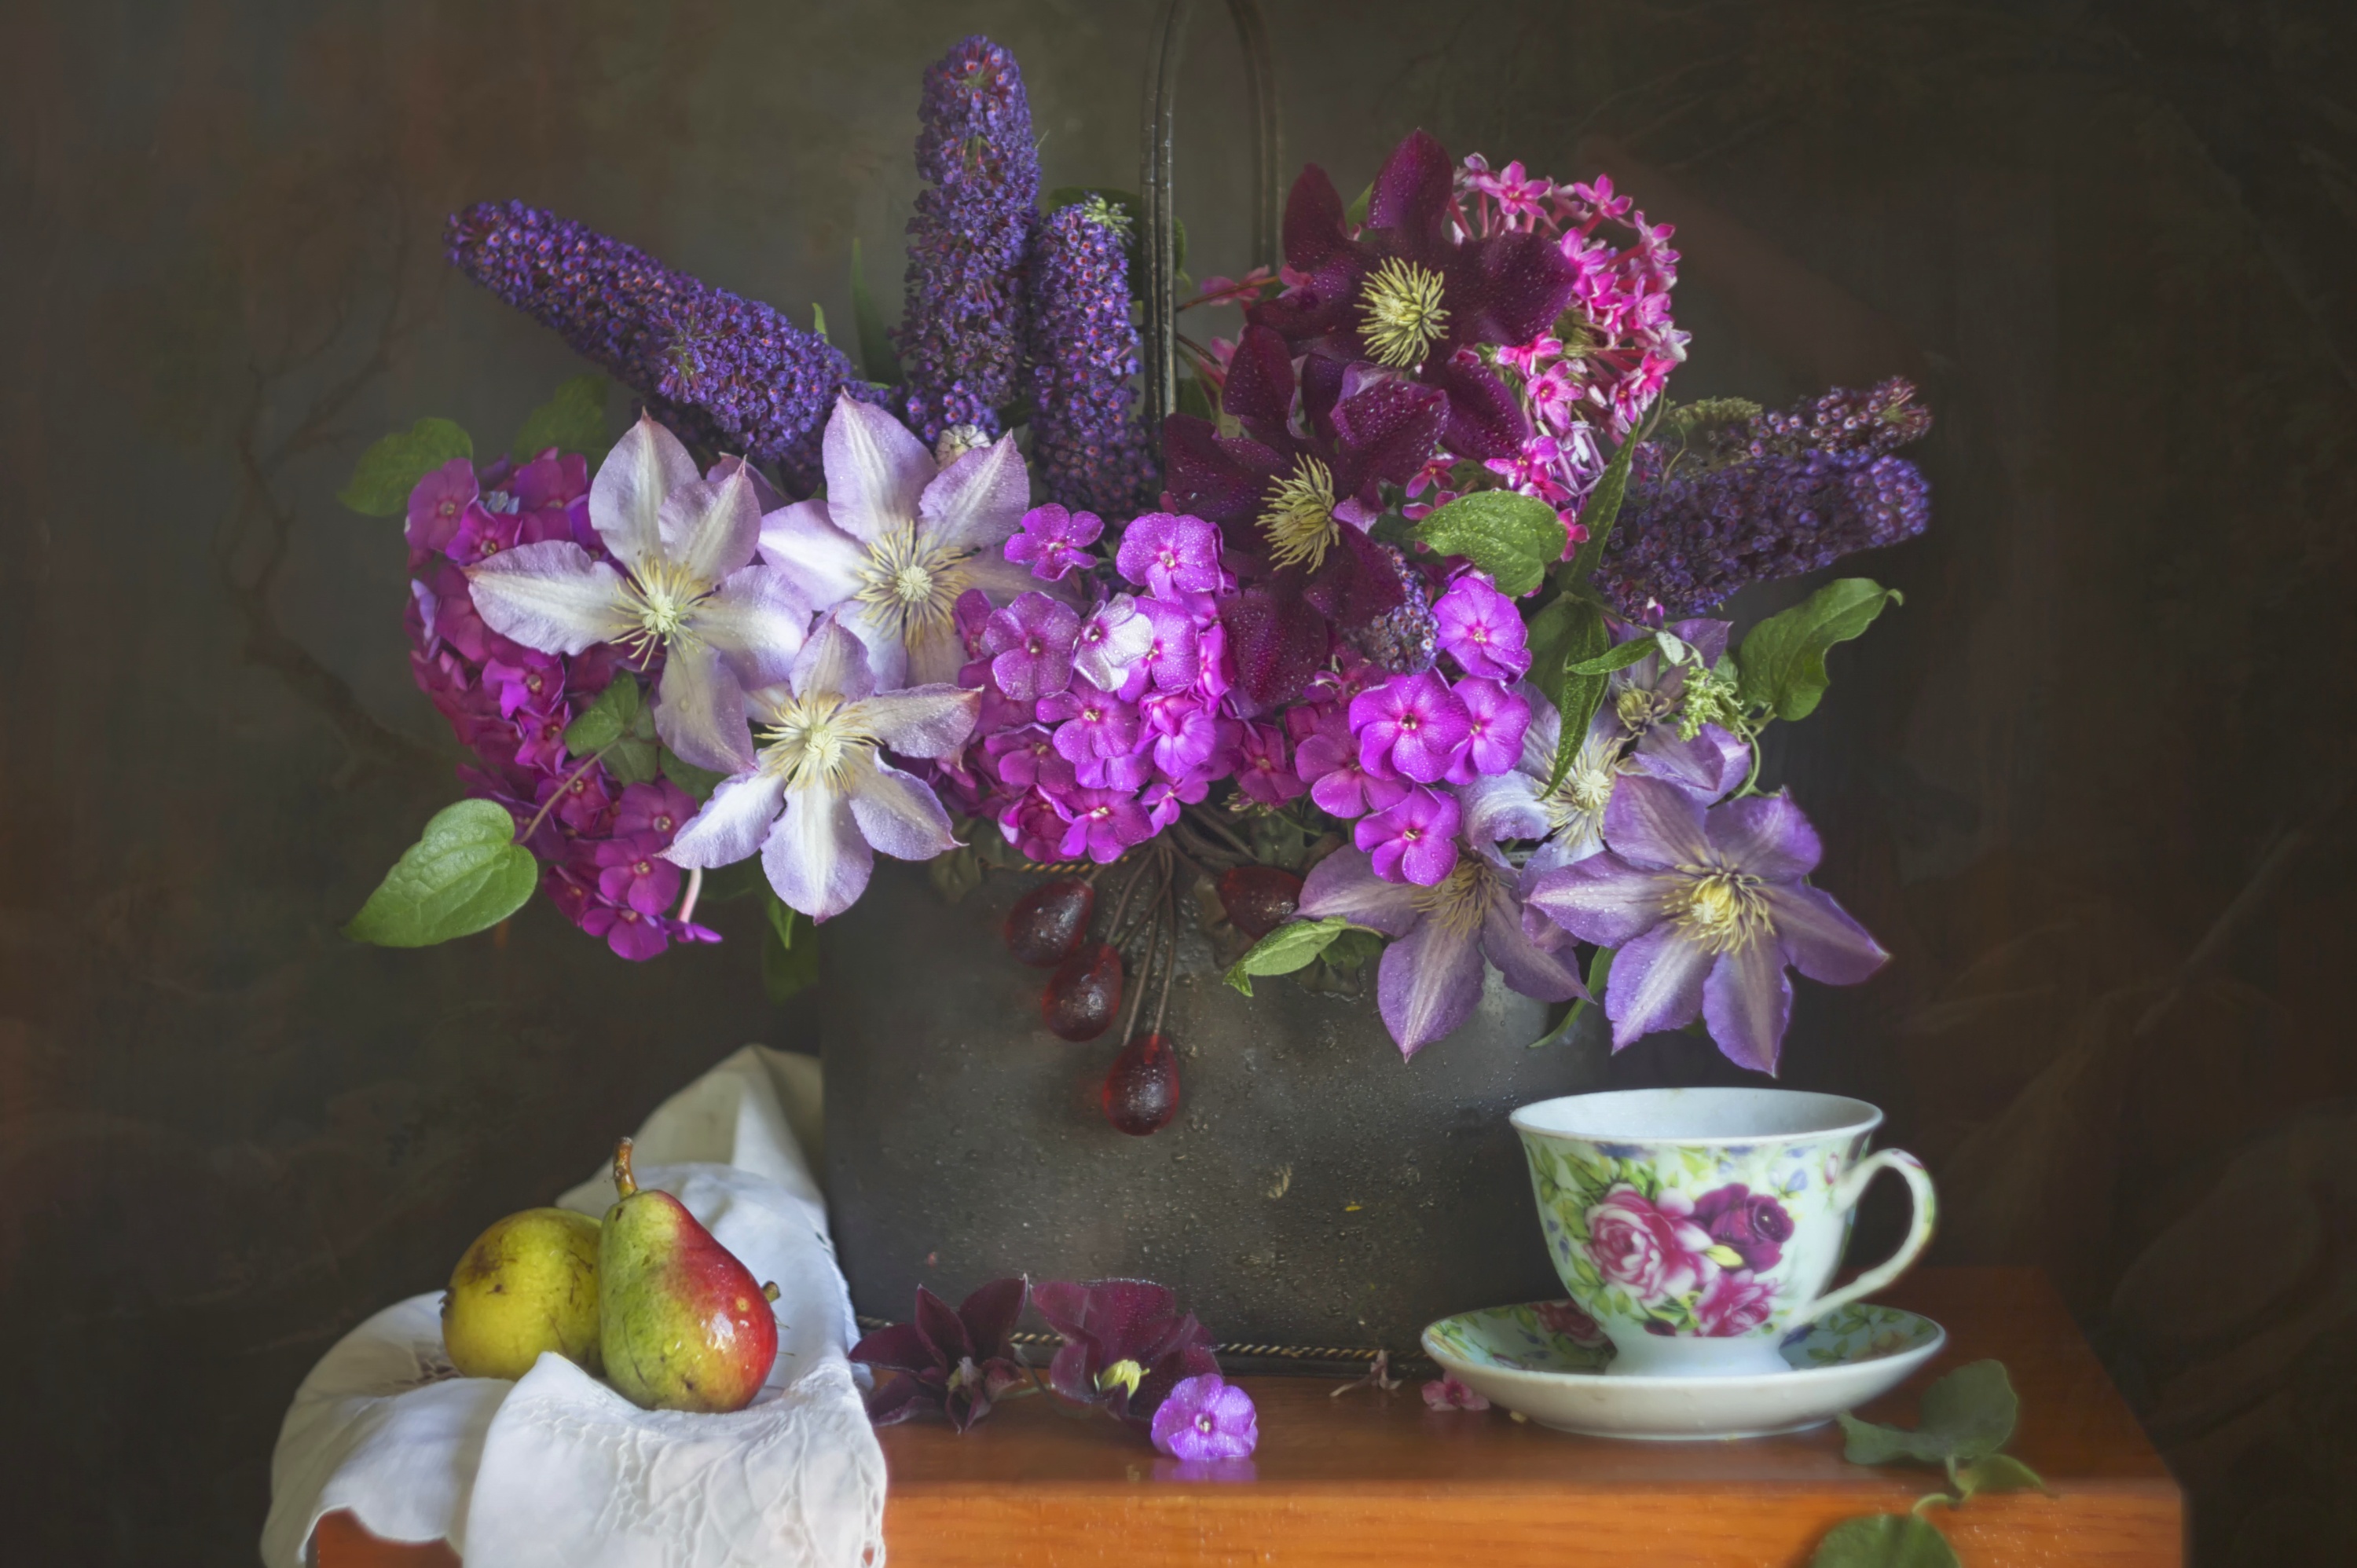 photography, still life, bouquet, clematis, cup, flower, pear, phlox mobile wallpaper